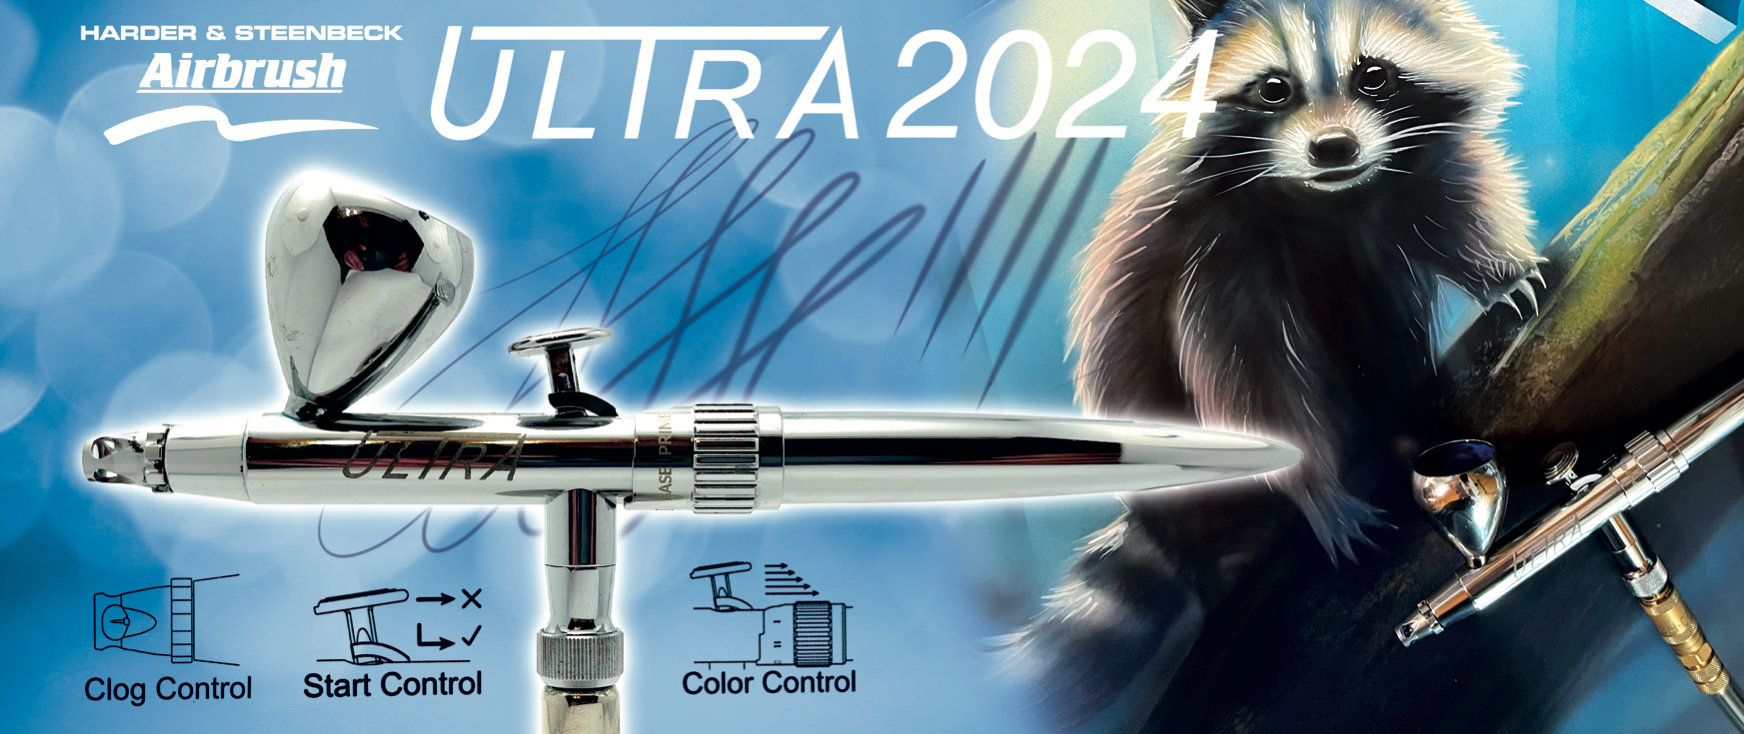 Three in a row: Ultra 2024, Evolution 2024 CRplus and Infinity Chameleon